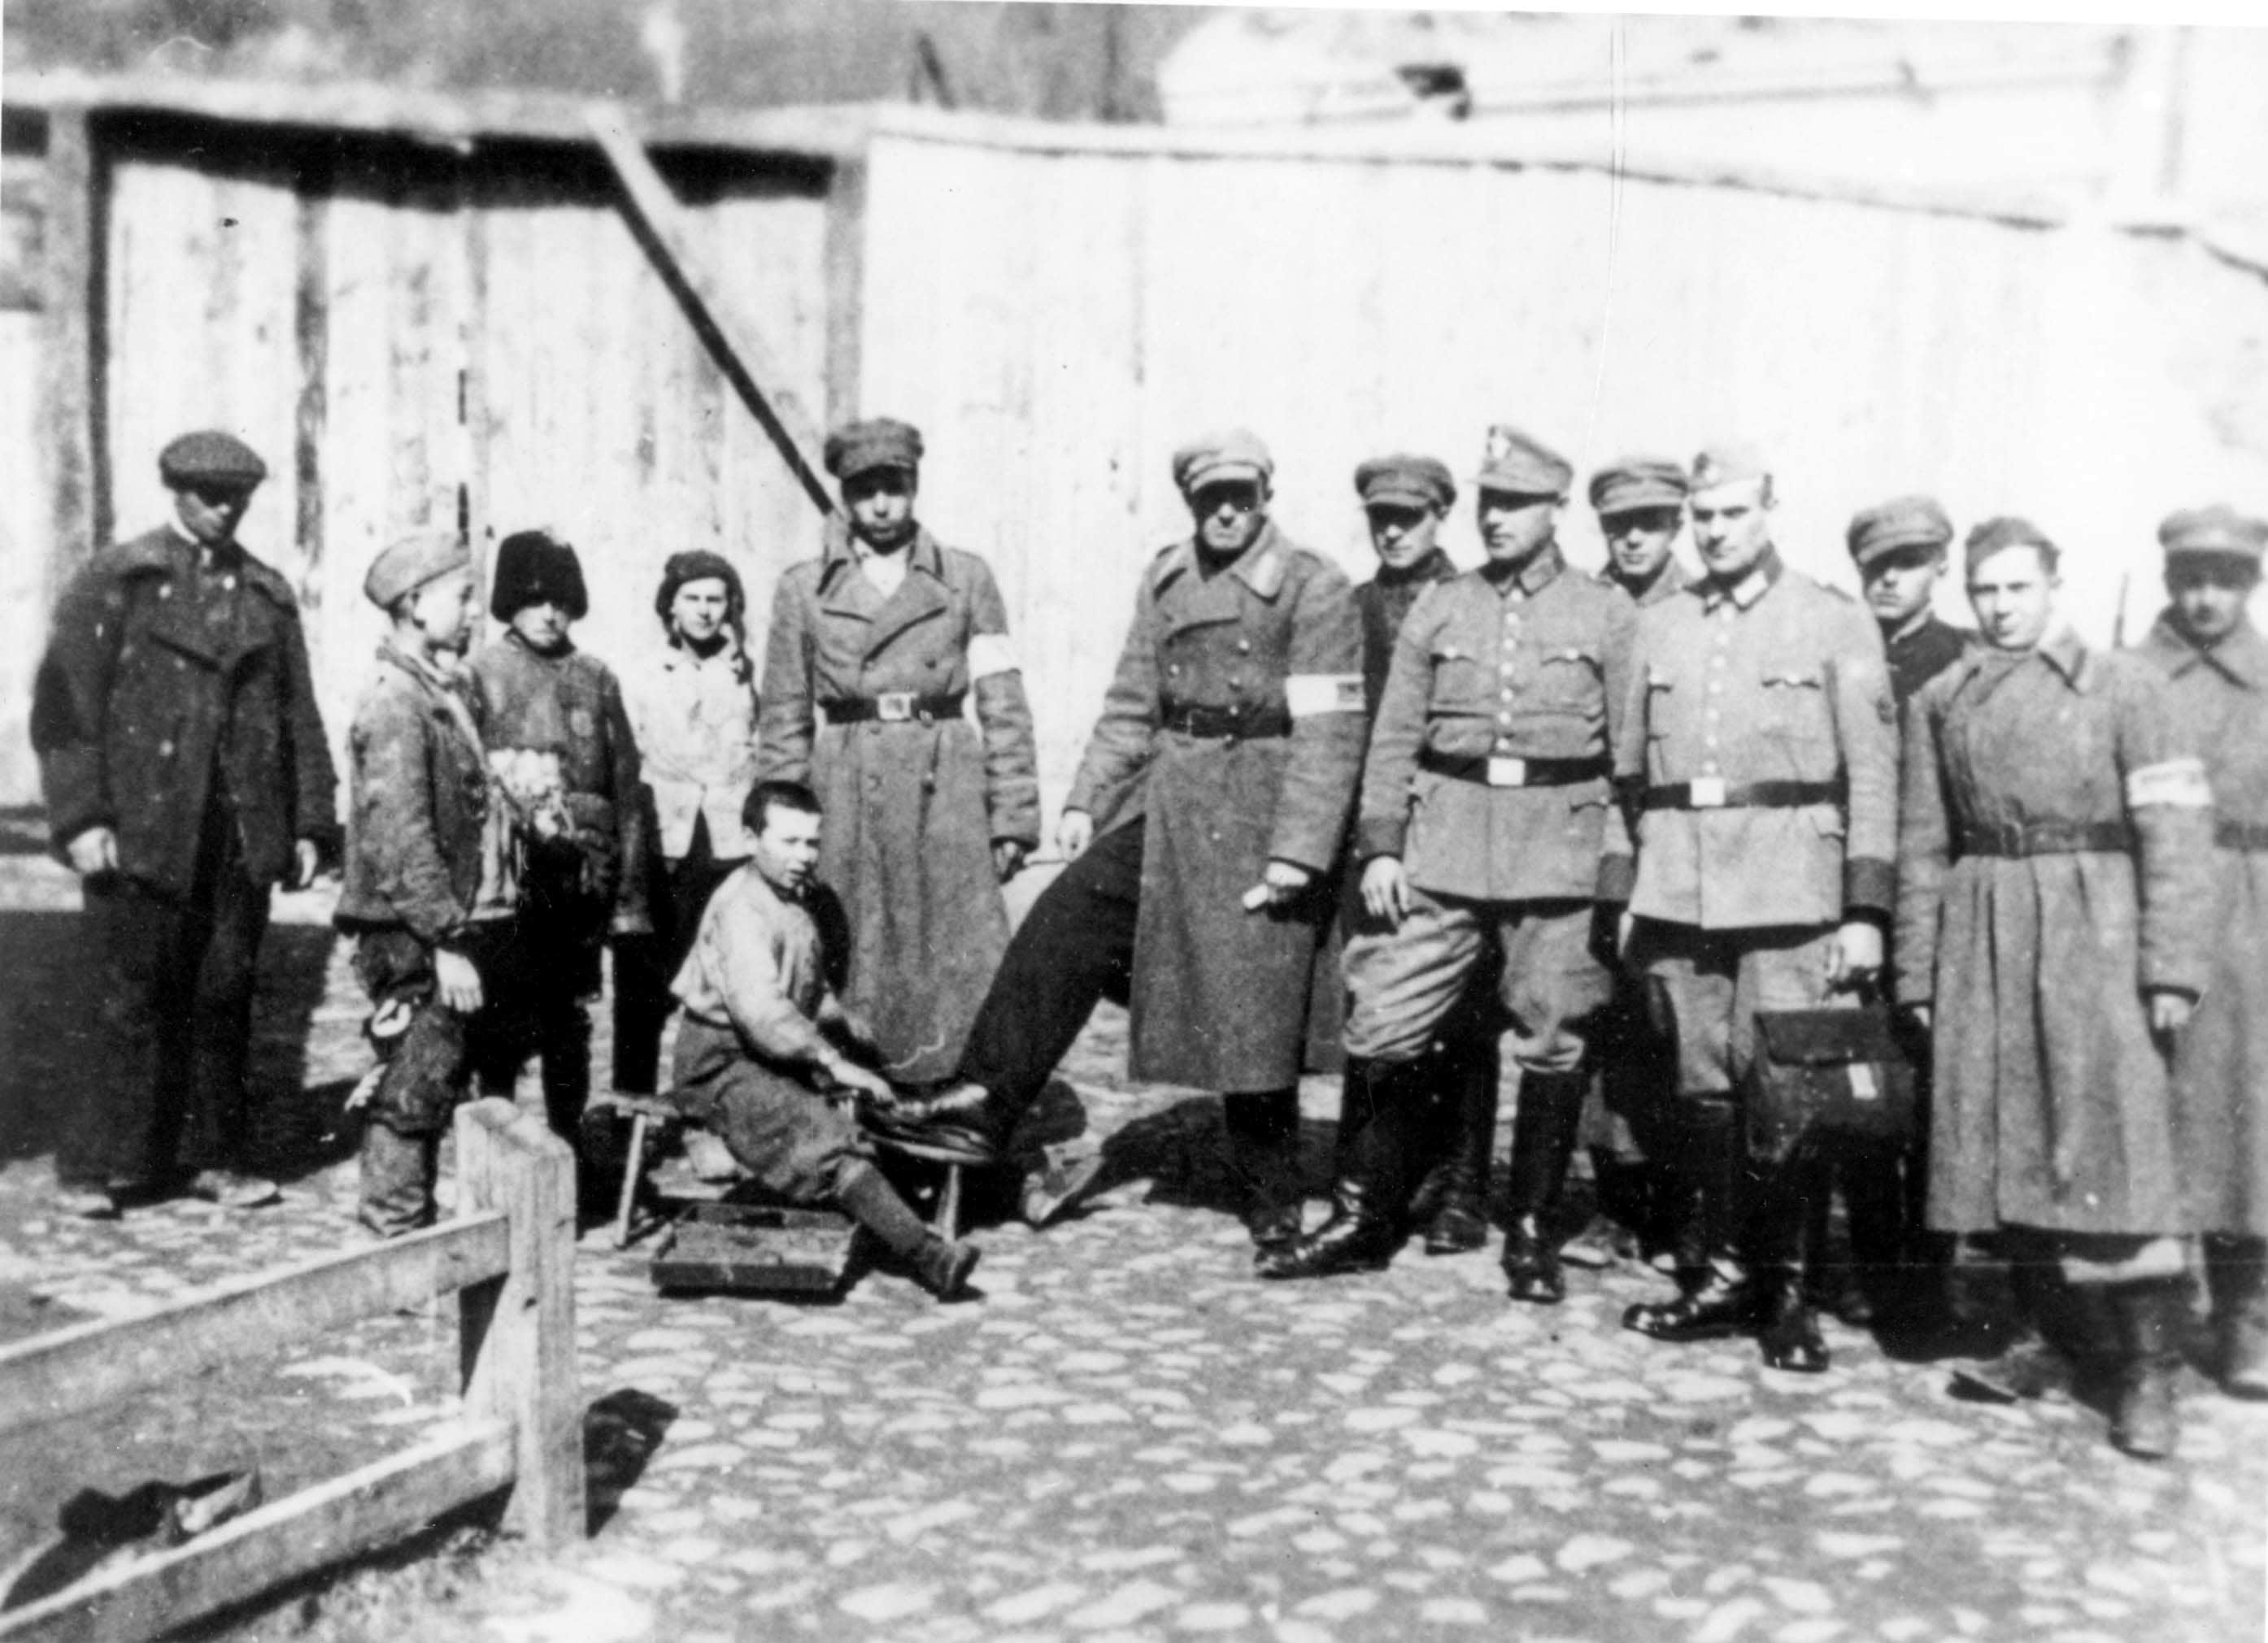 At the main gate of the Krzemieniec ghetto, Jewish boy polishing the boots of Jewish policemen as German policemen look on